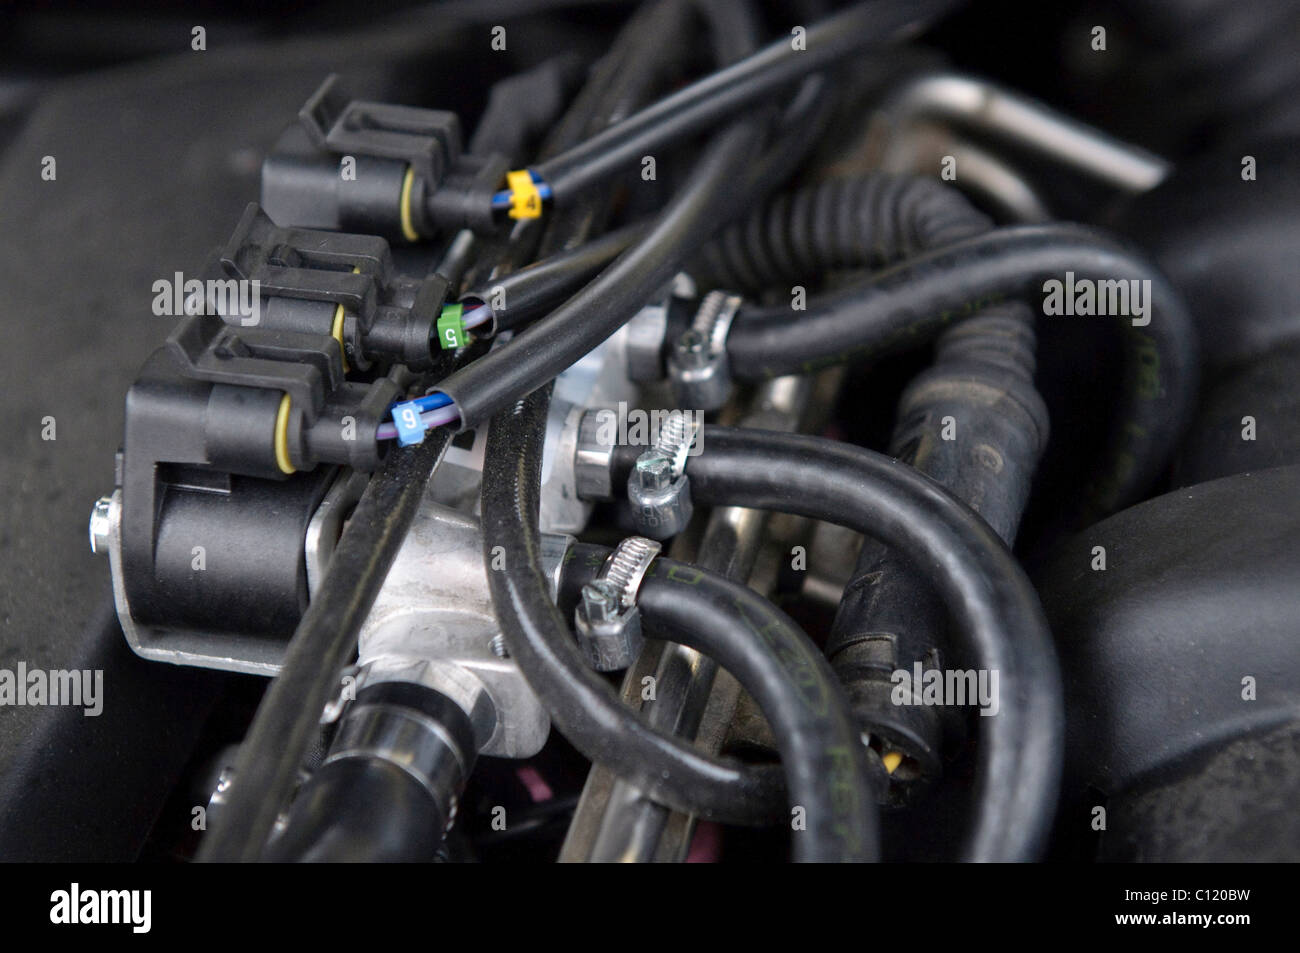 Gas injectors, LPG system STAG-300-6 plus in a car of the BMW 7 Series,  model E38, built 1997, 6-cylinder straight engine with Stock Photo - Alamy